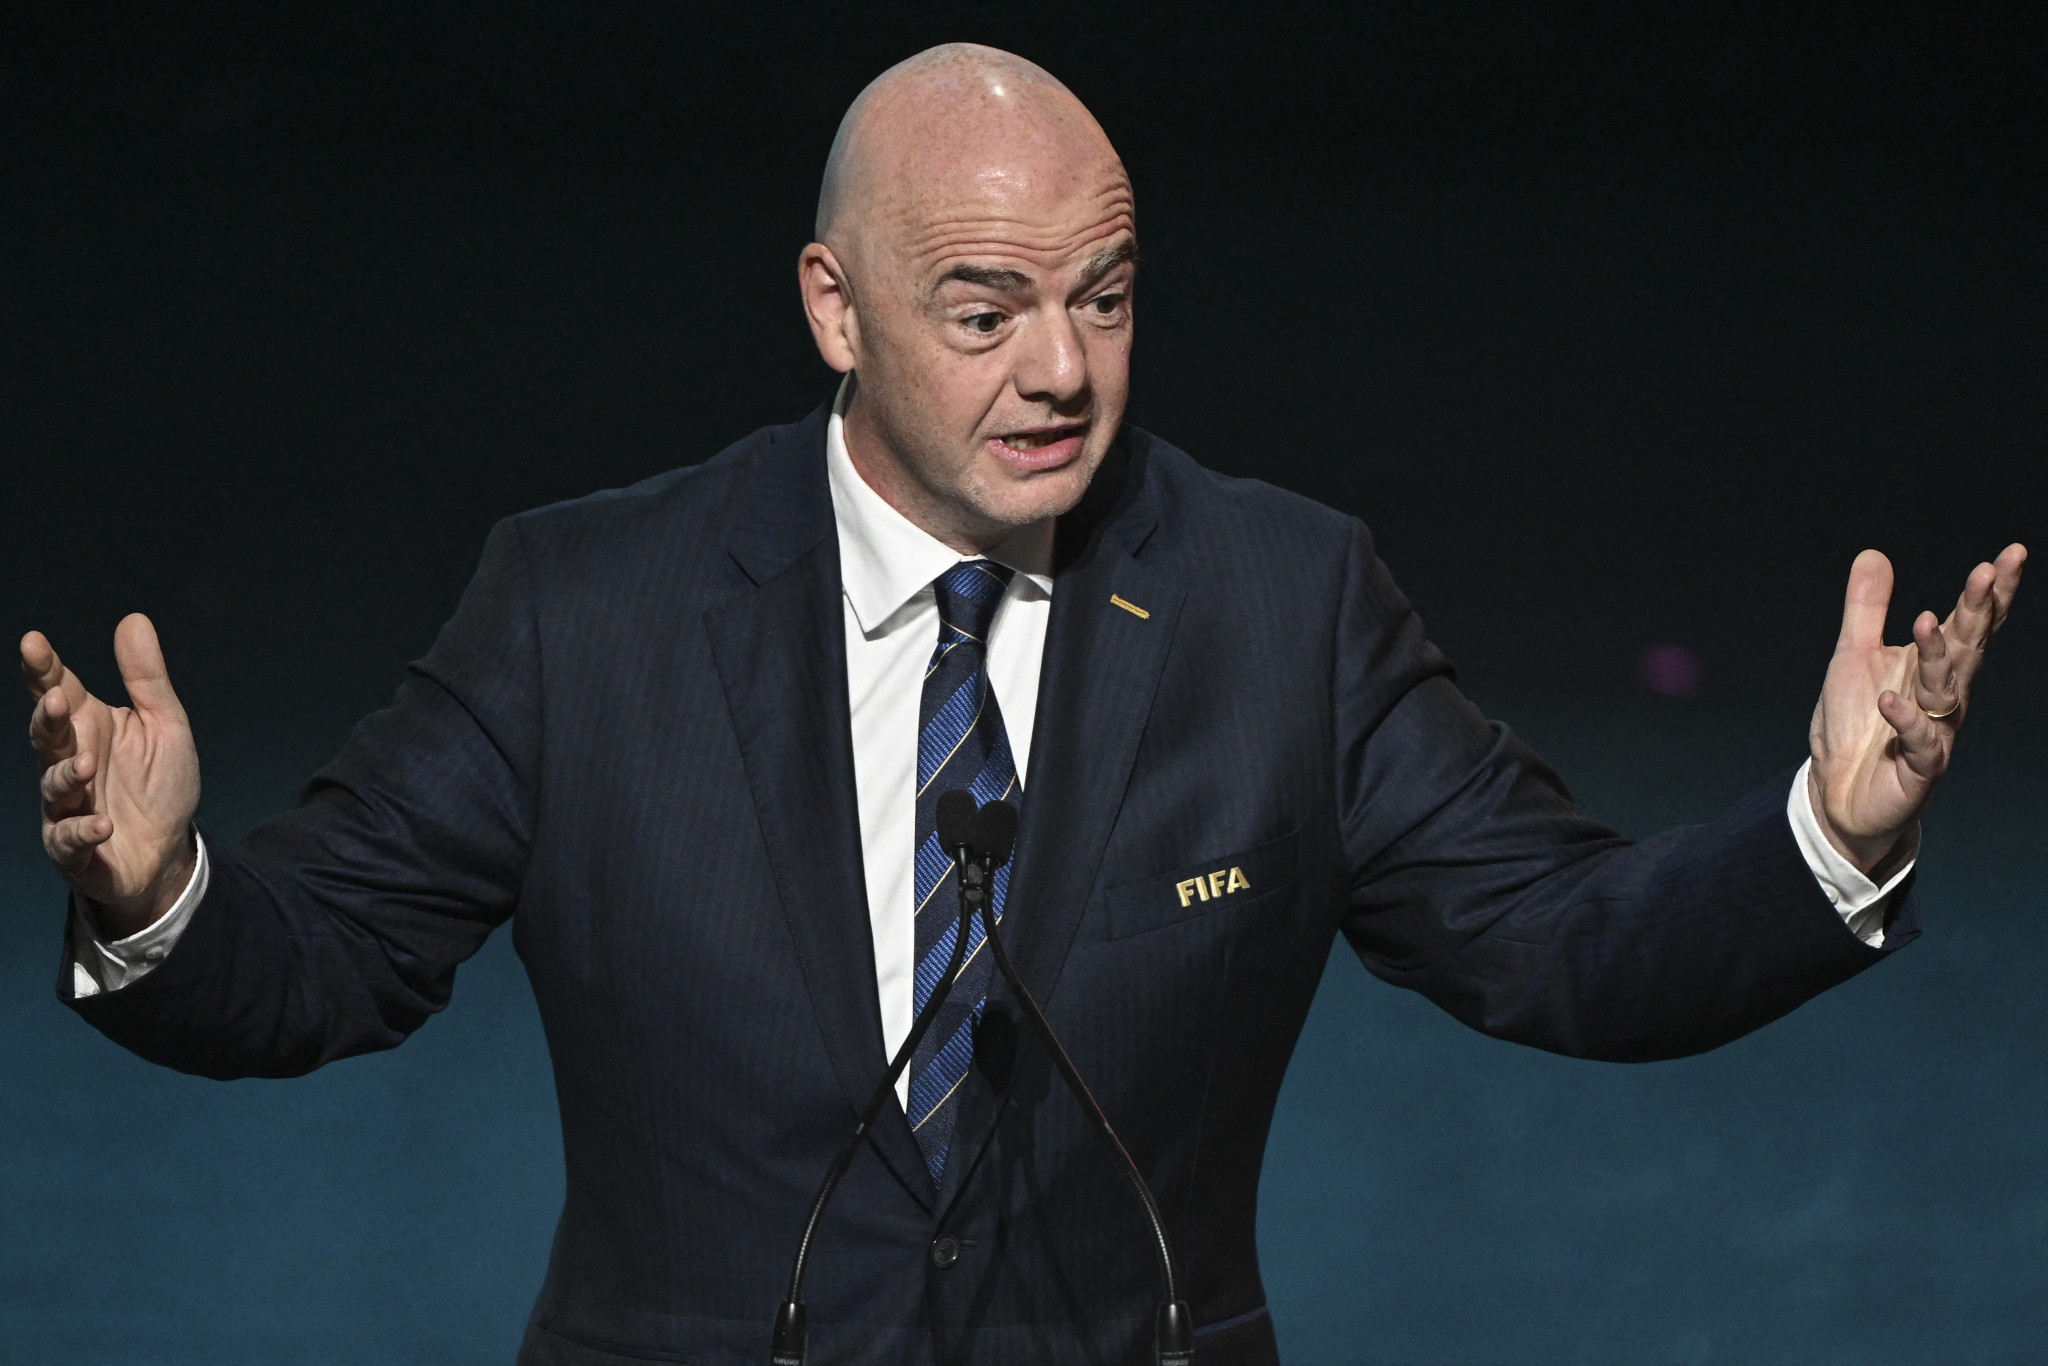 Gianni Infantino has served as FIFA President since 2016 ©Getty Images